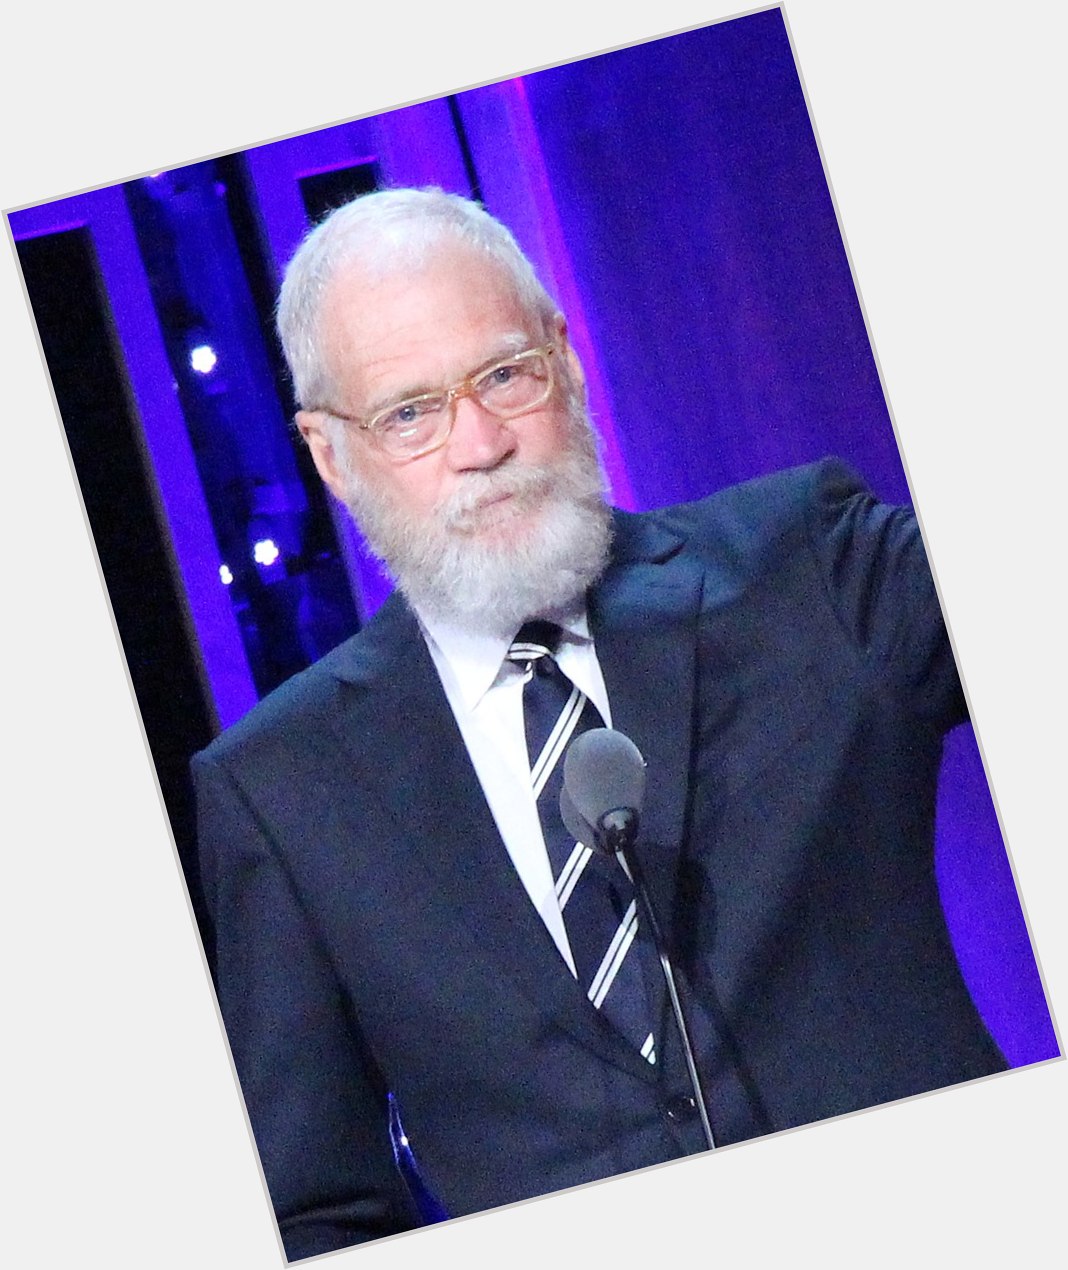 Happy 76th birthday, David Letterman!
(his beard is much younger) 